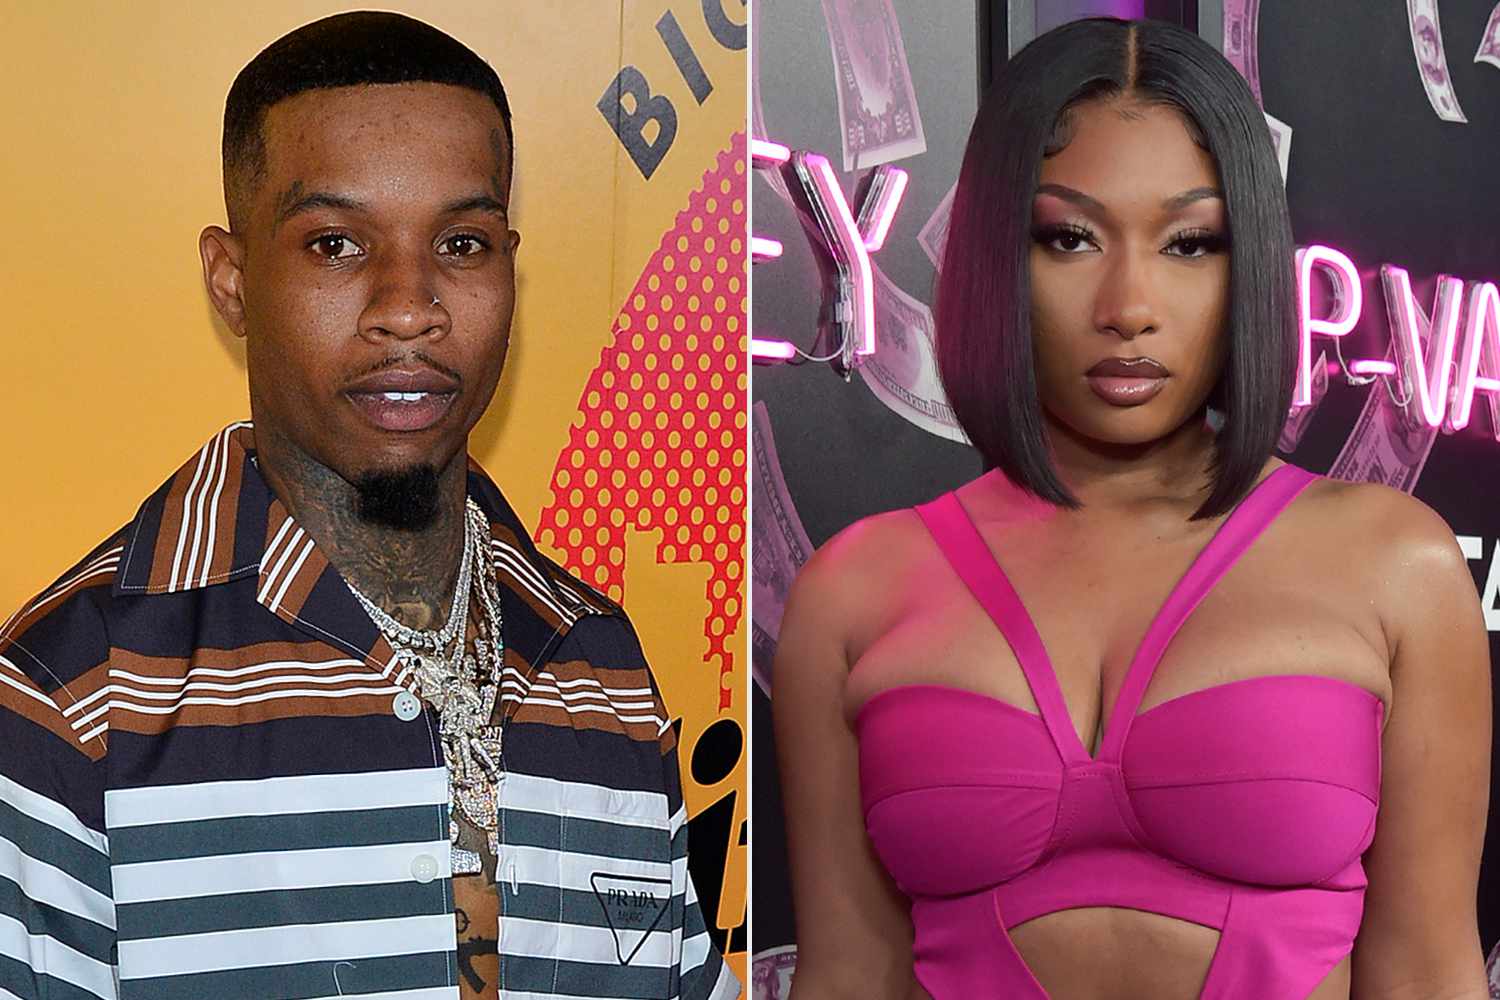 A Two-Part Documentary On The Megan Thee Stallion And Tory Lanez Shooting Is Set To Hit Streaming, And Fans Are Not Happy About It